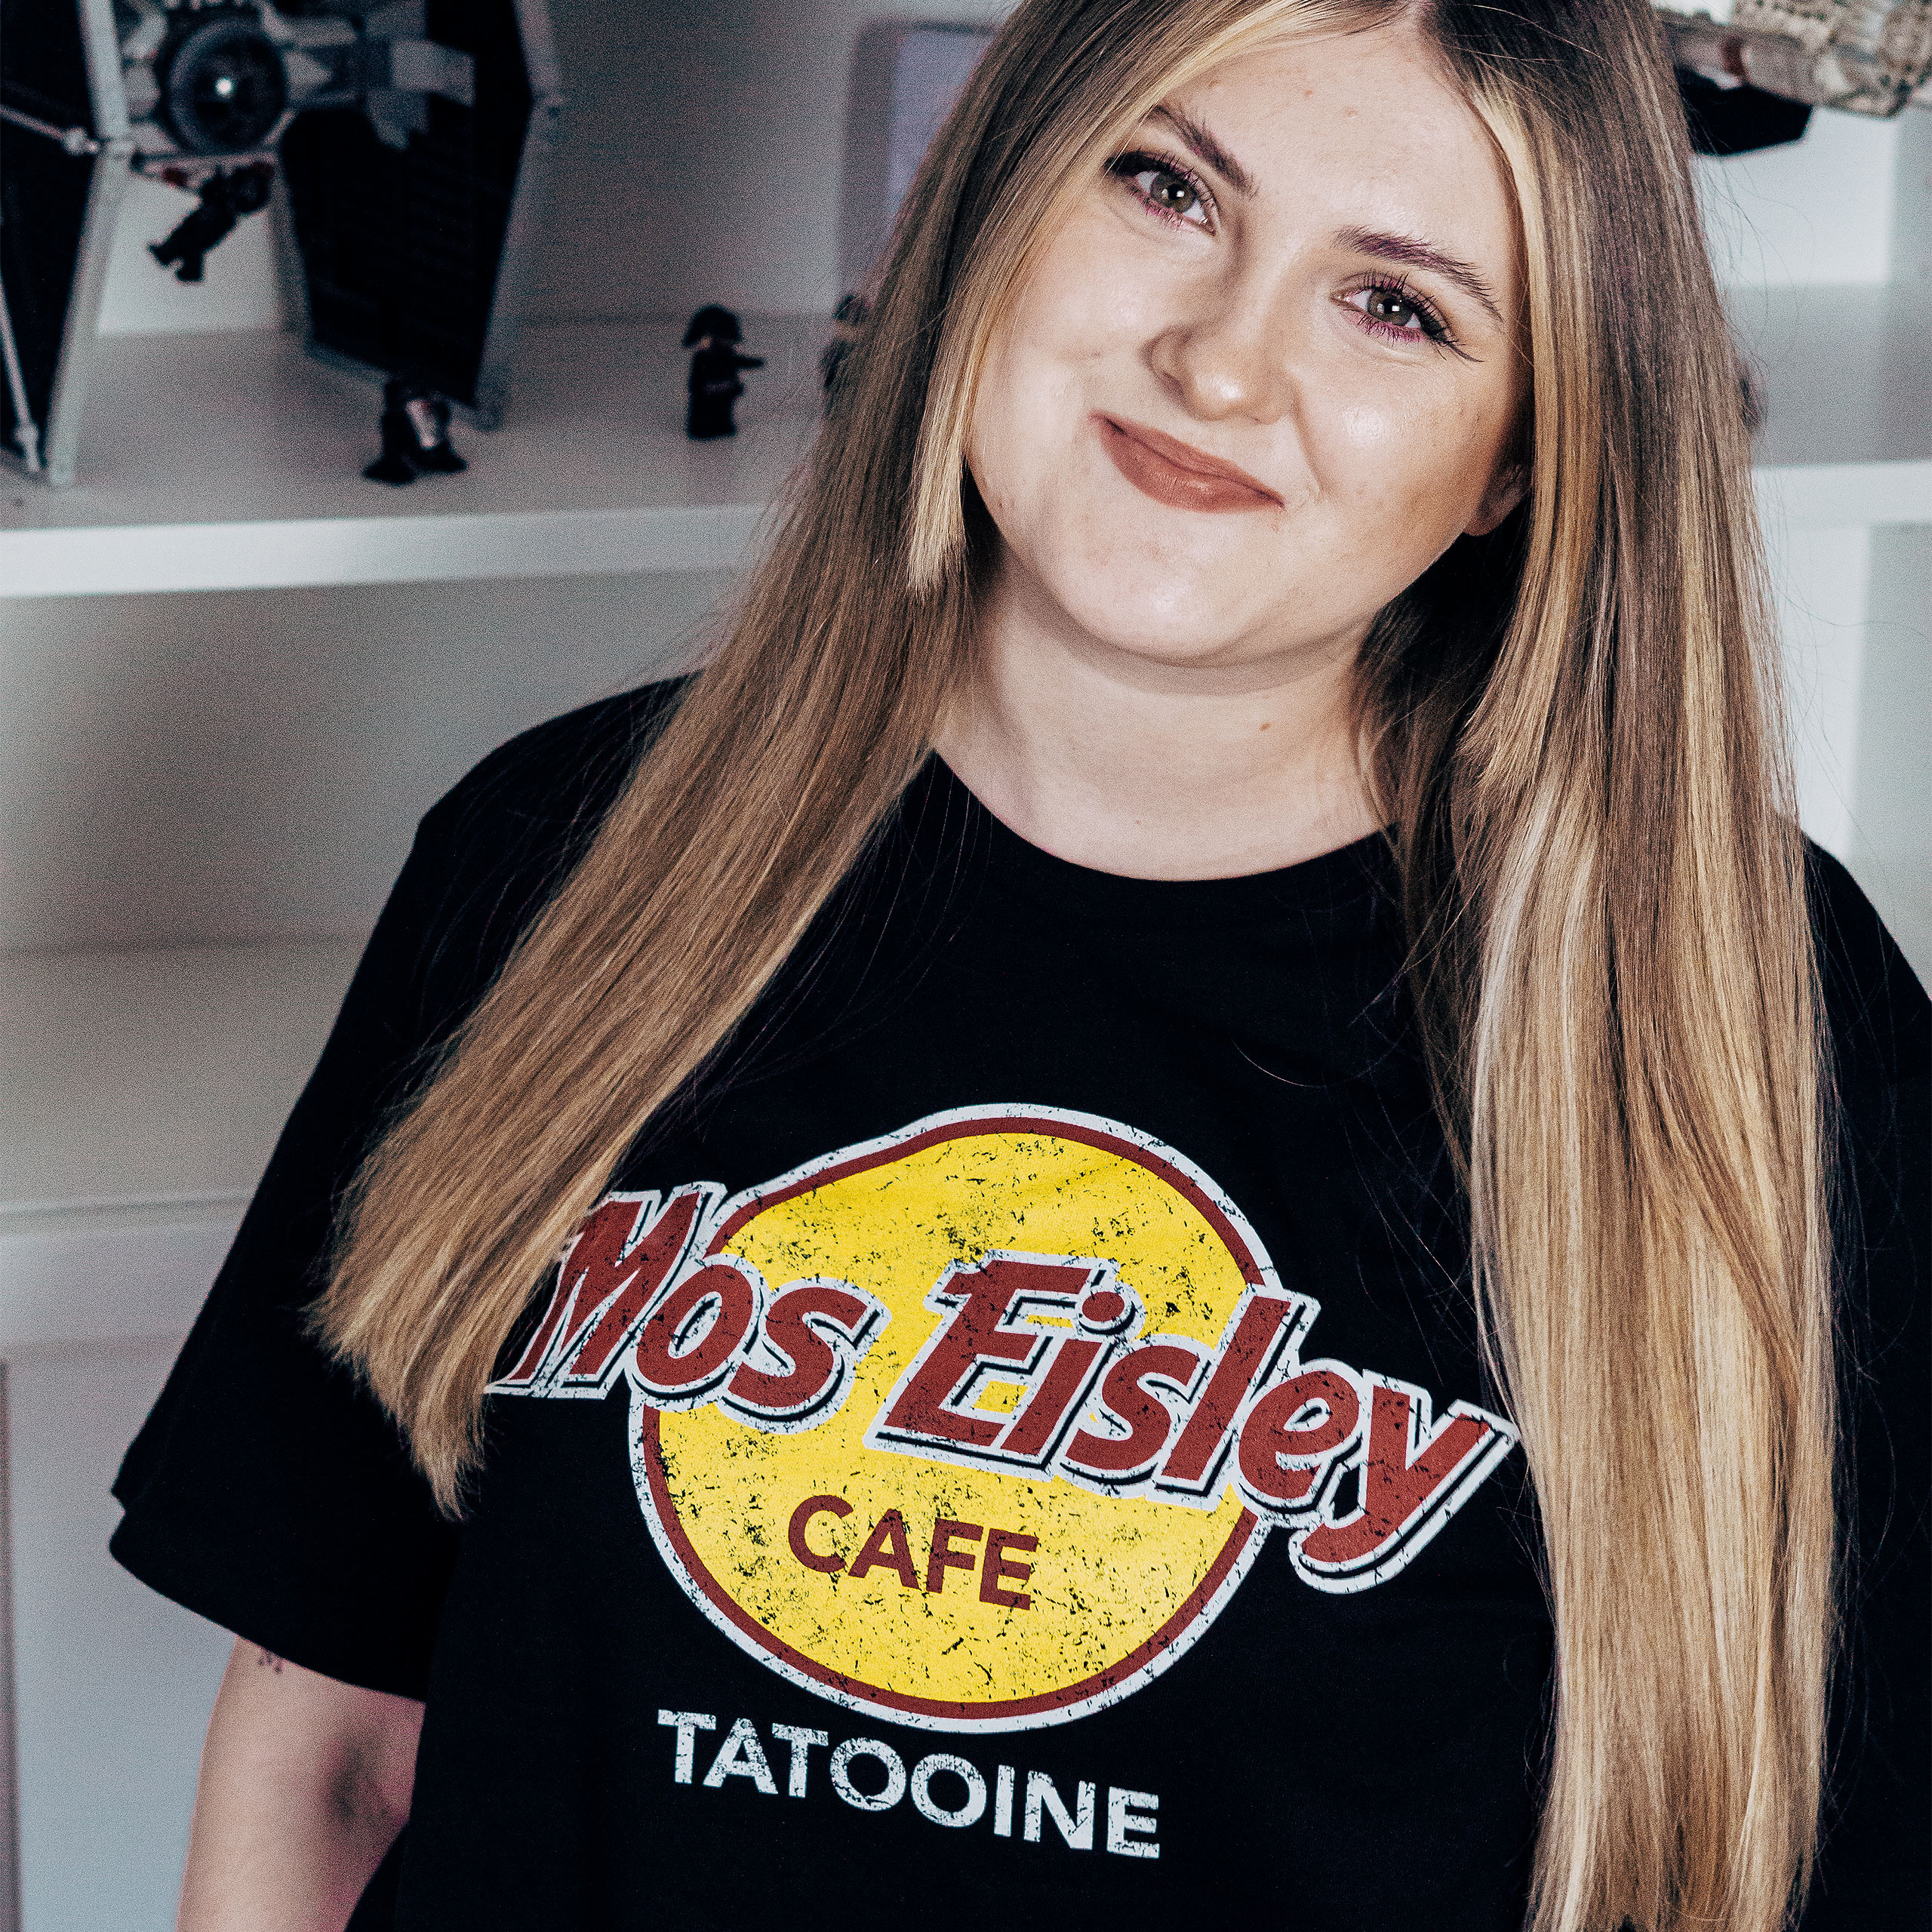 Mos Eisley Cafe T-Shirt for Star Wars Fans Black